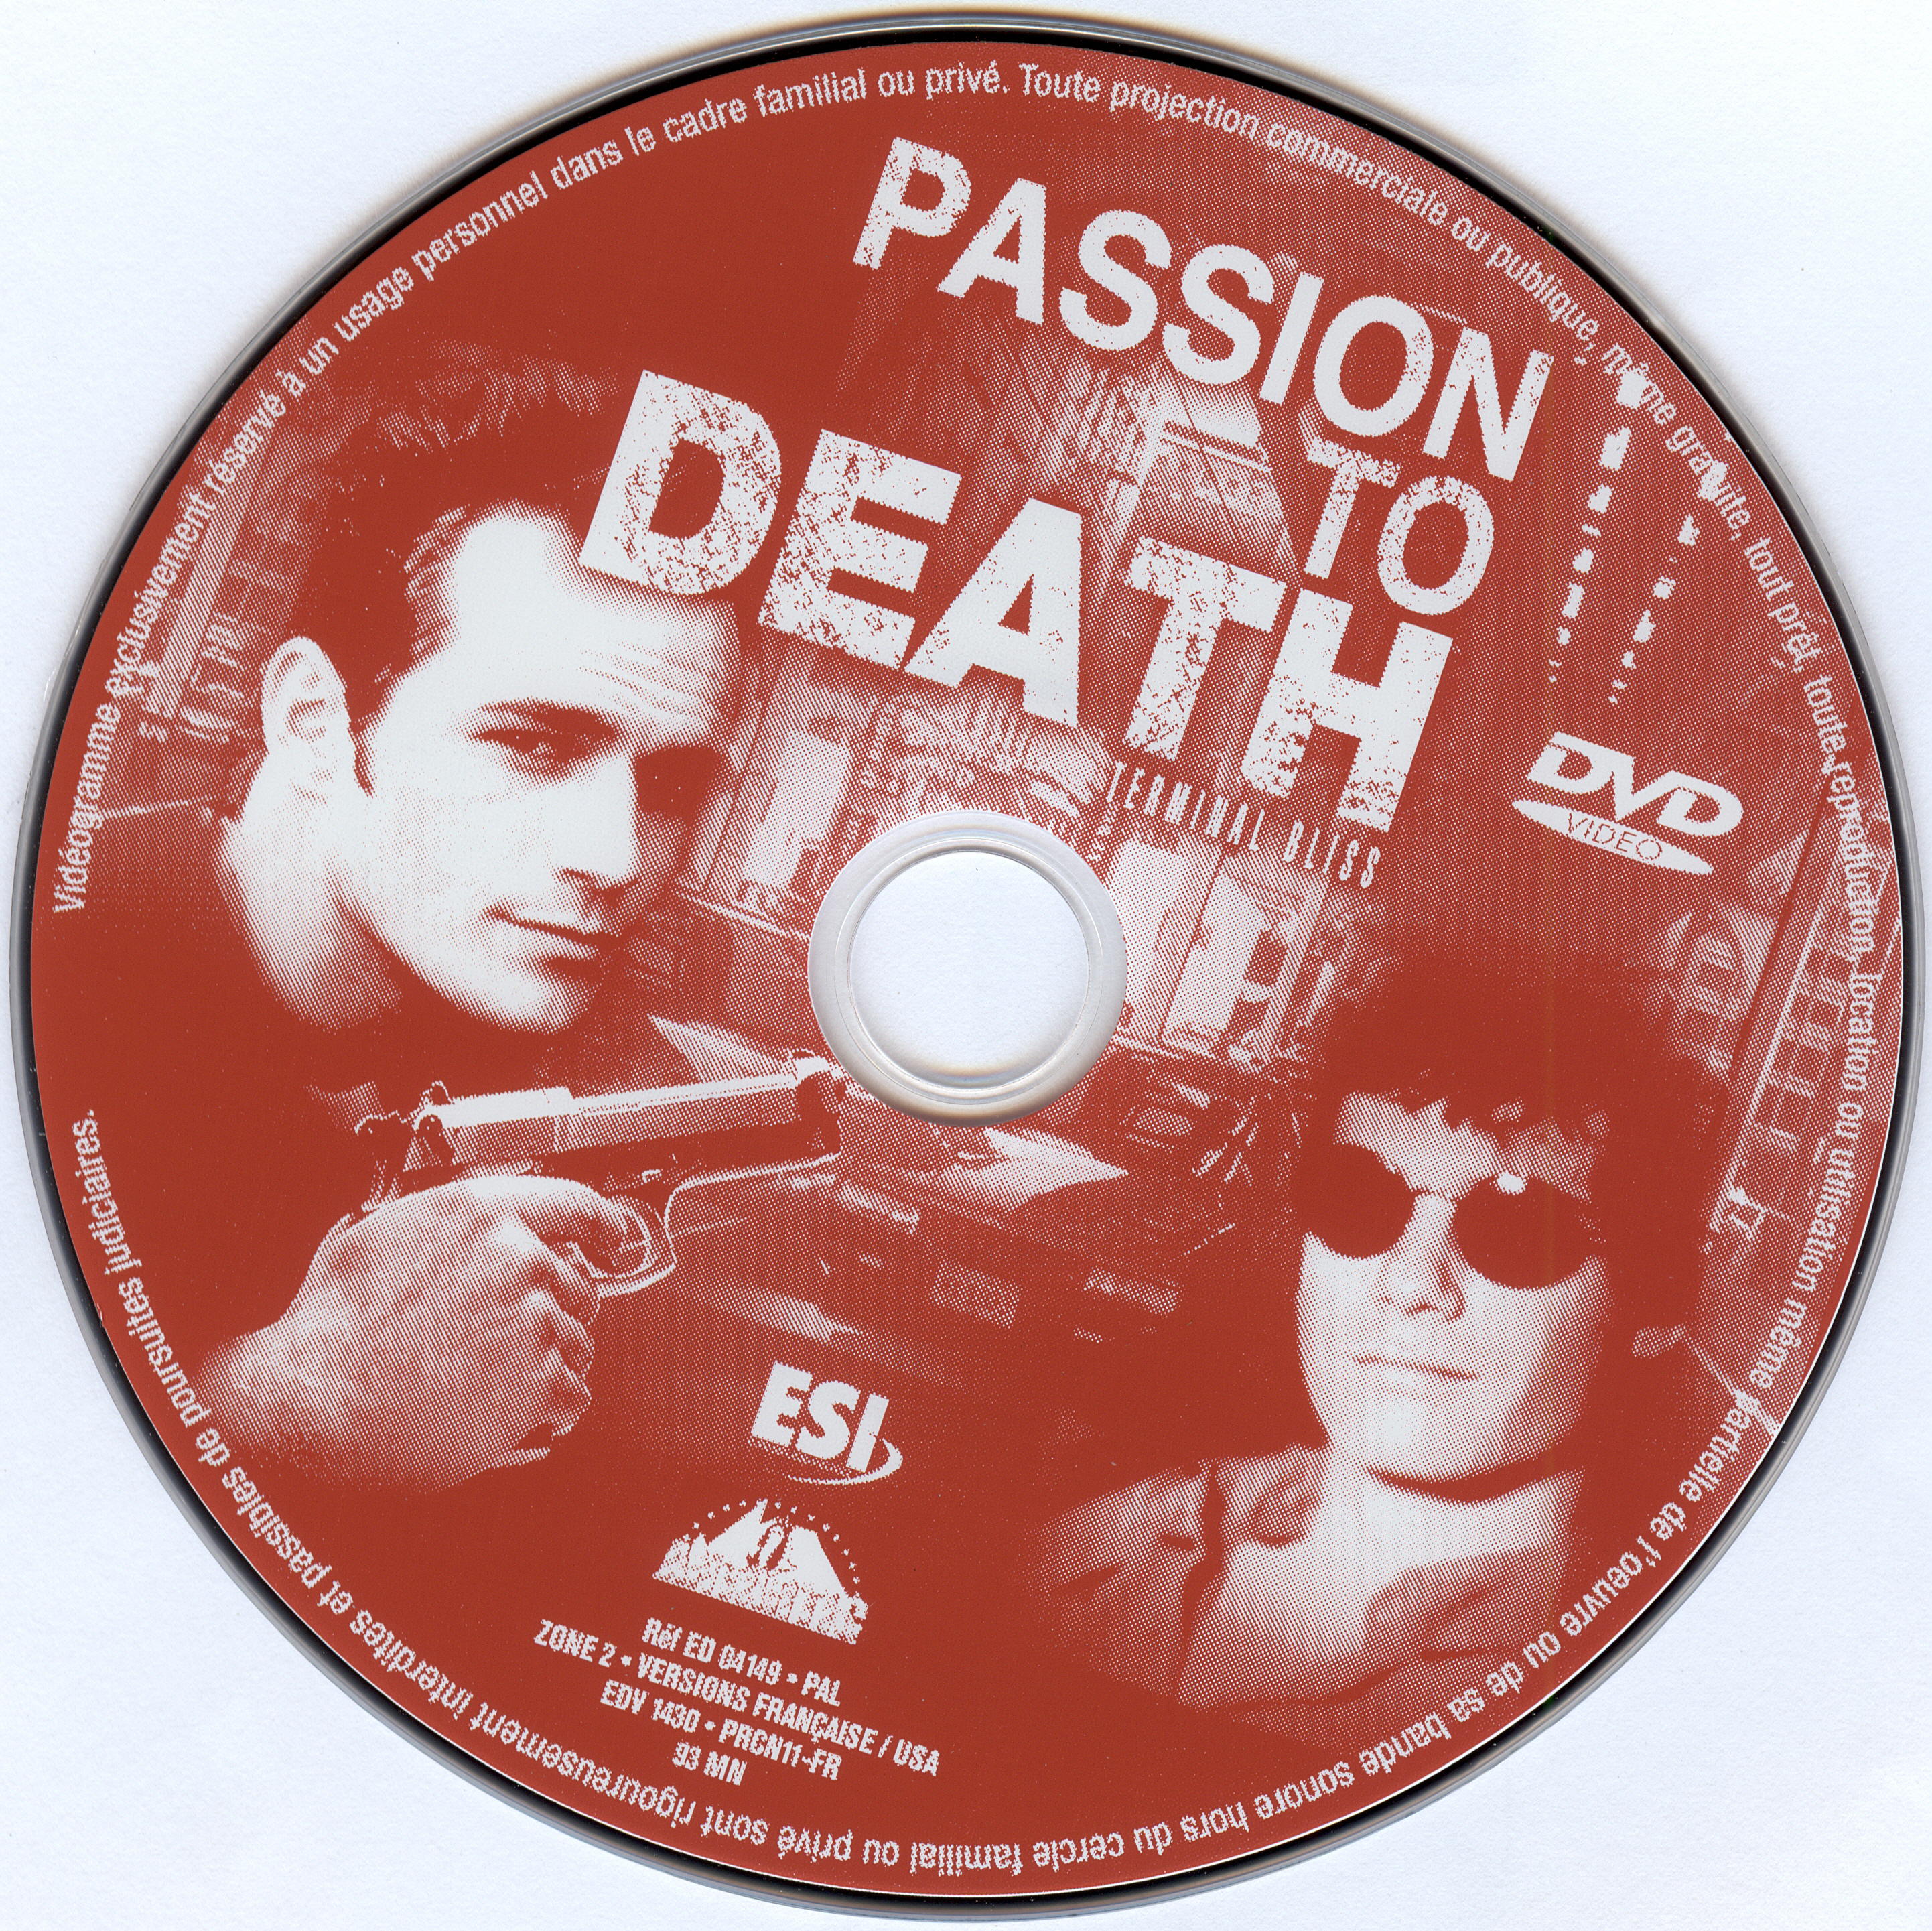 Passion to death